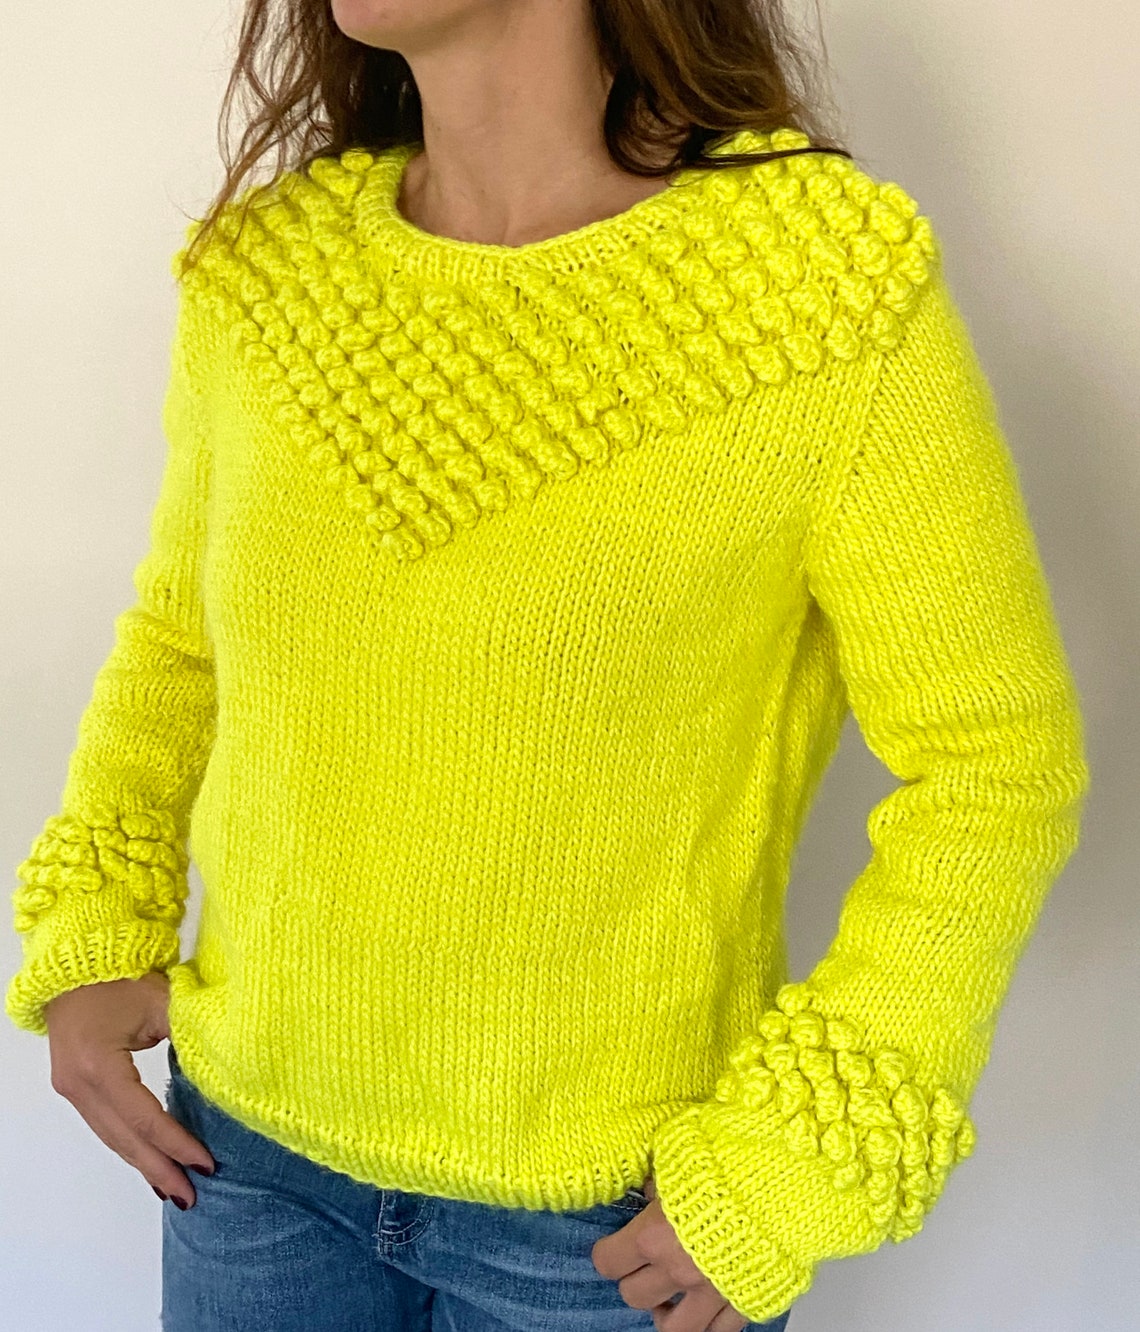 KNITTING PATTERN the Bobble Pullover Sweater PDF sizes Xs | Etsy